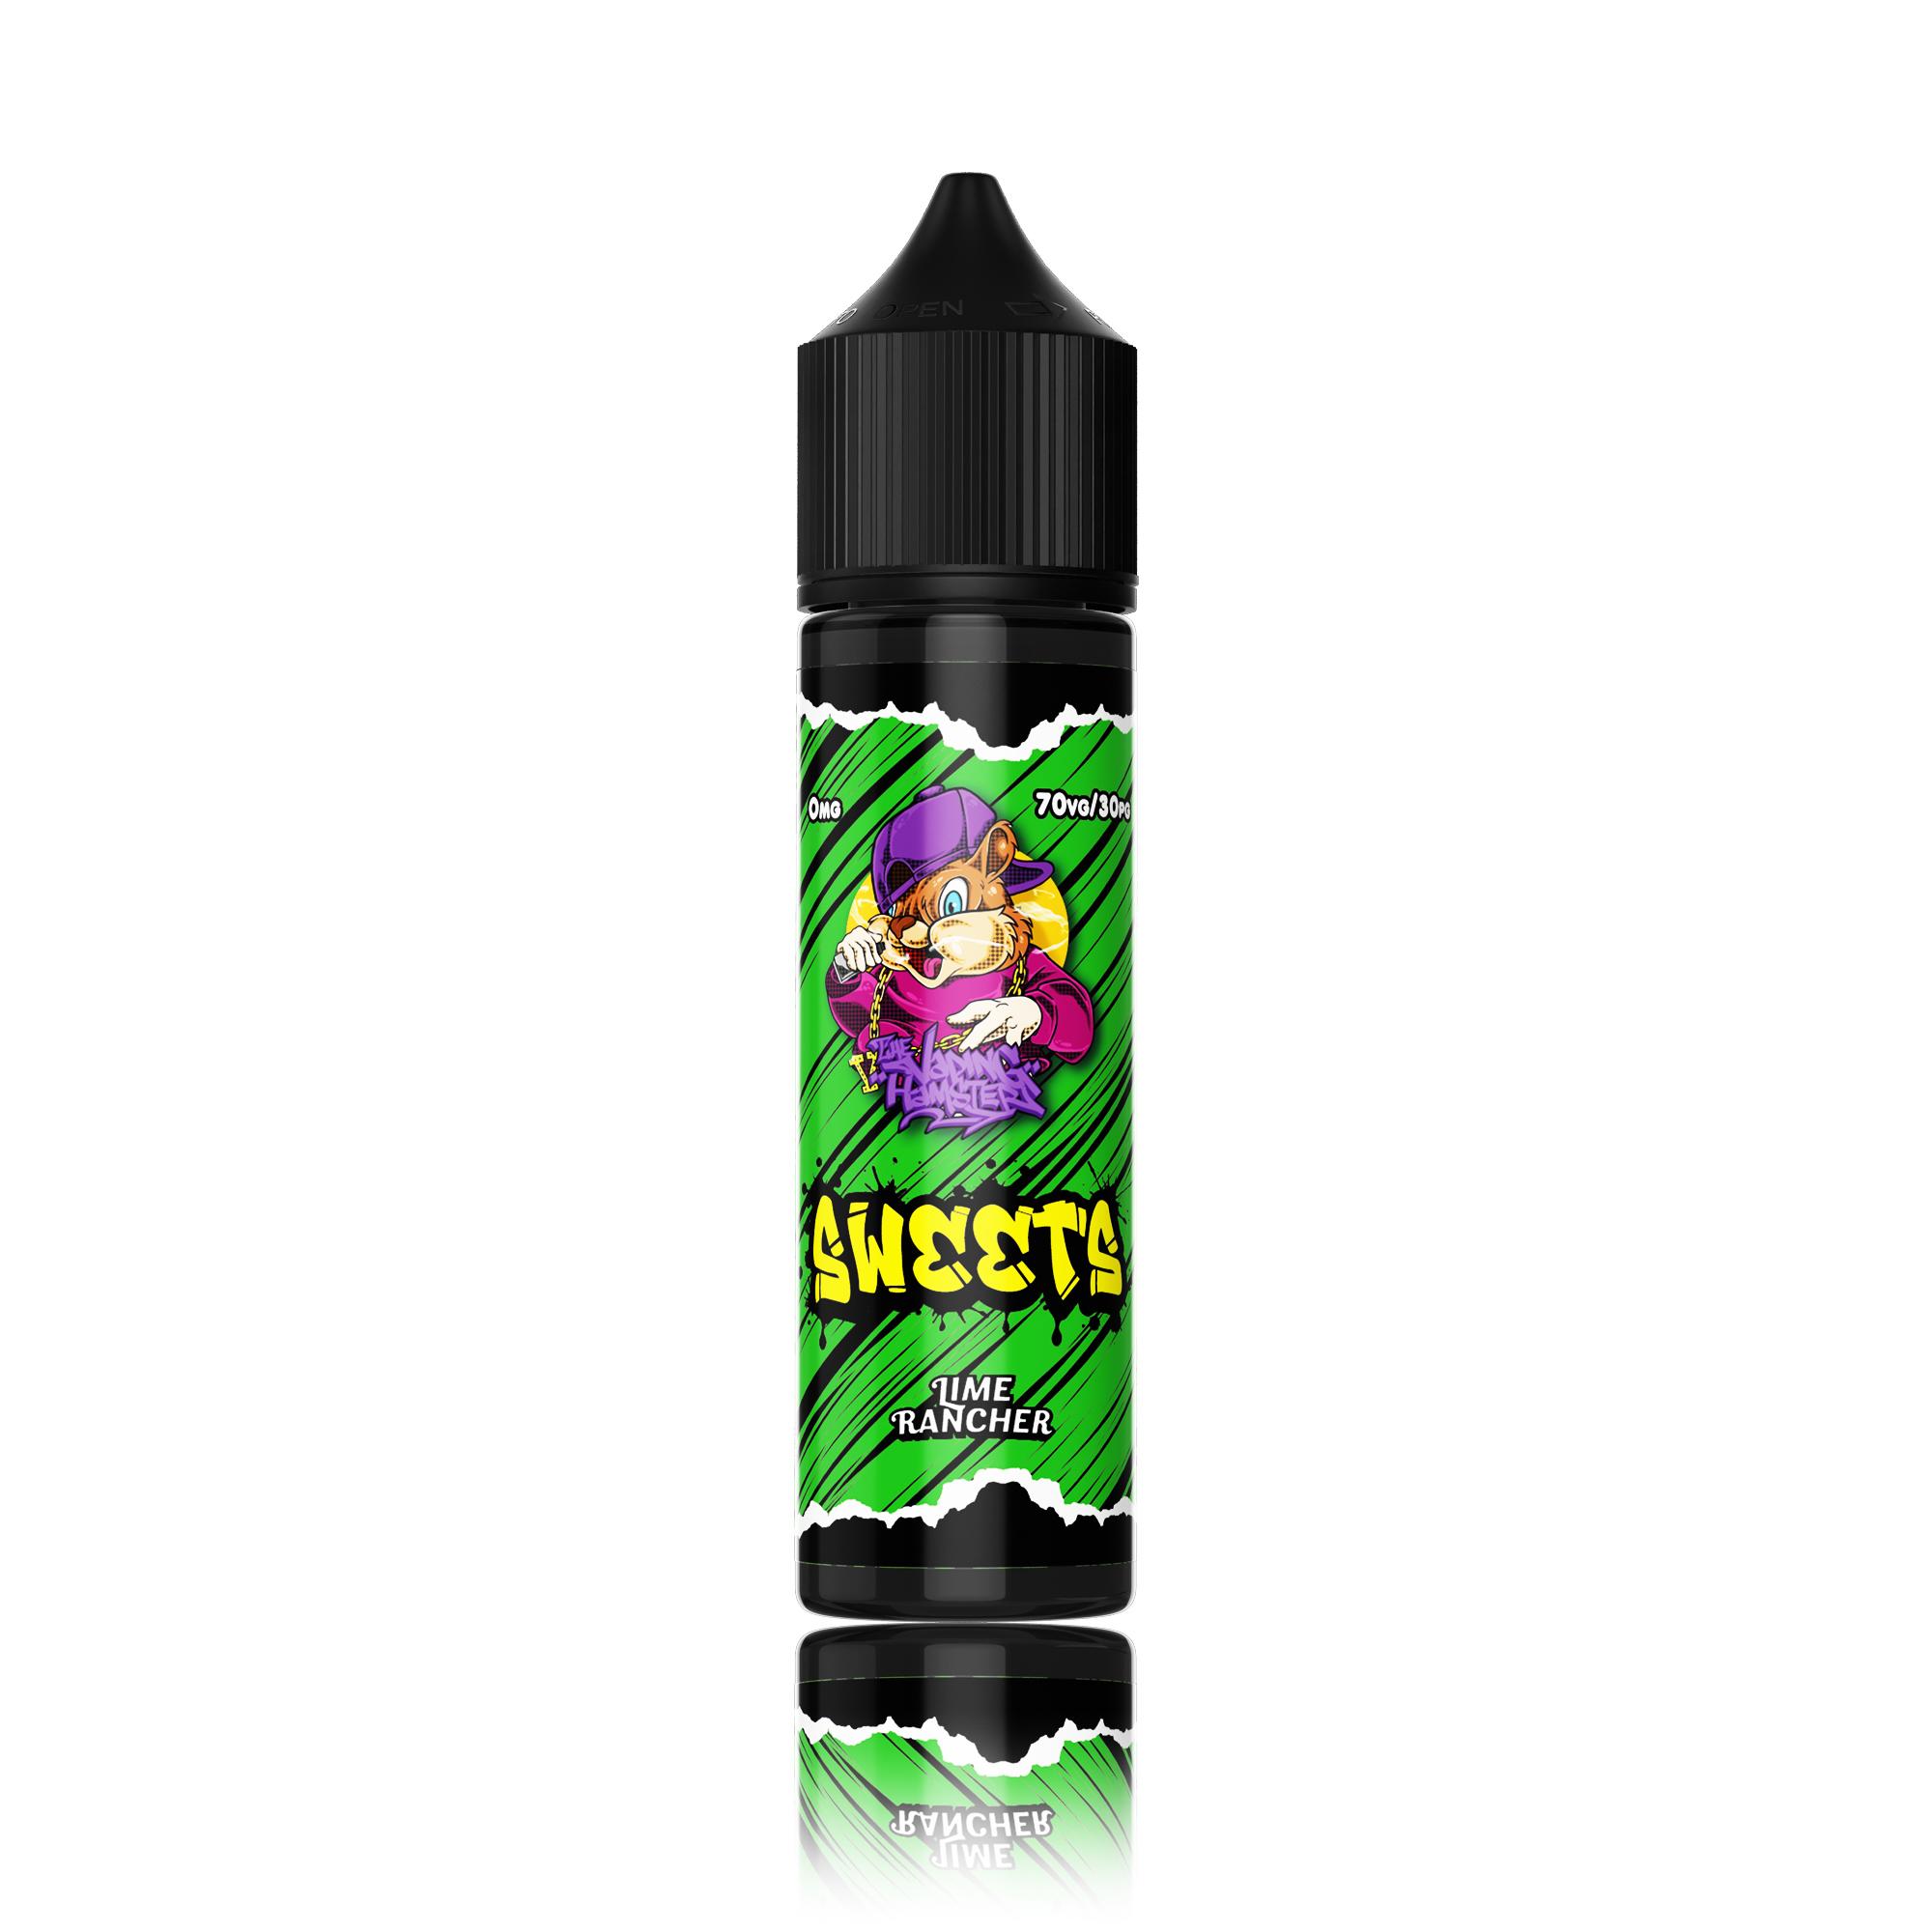 Lime Rancher by The Vaping Hamster